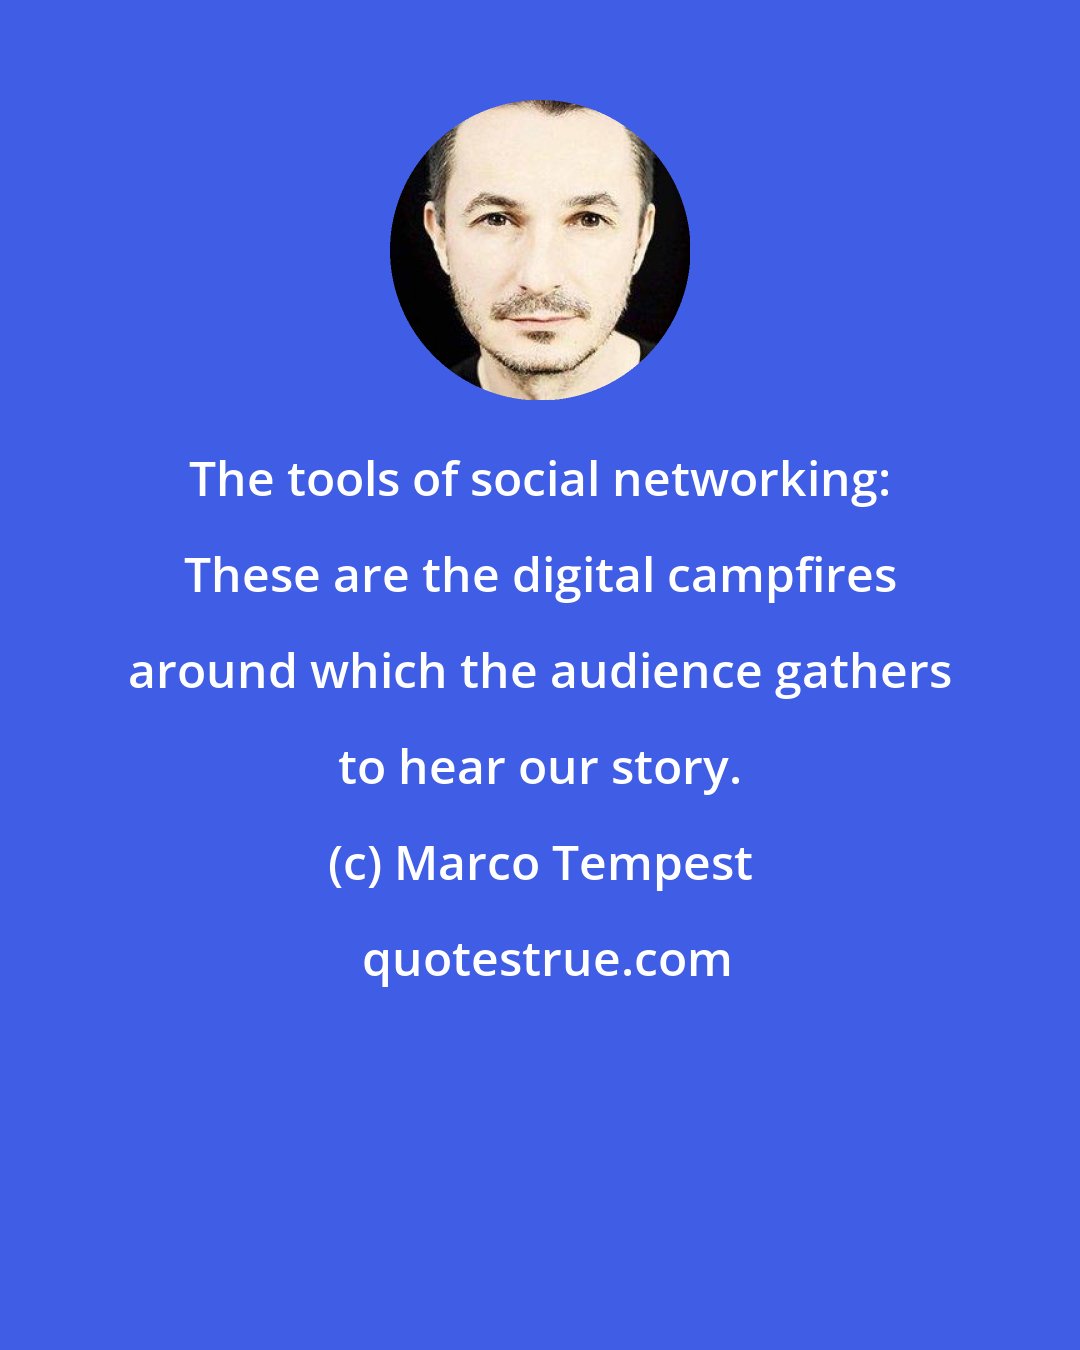 Marco Tempest: The tools of social networking: These are the digital campfires around which the audience gathers to hear our story.